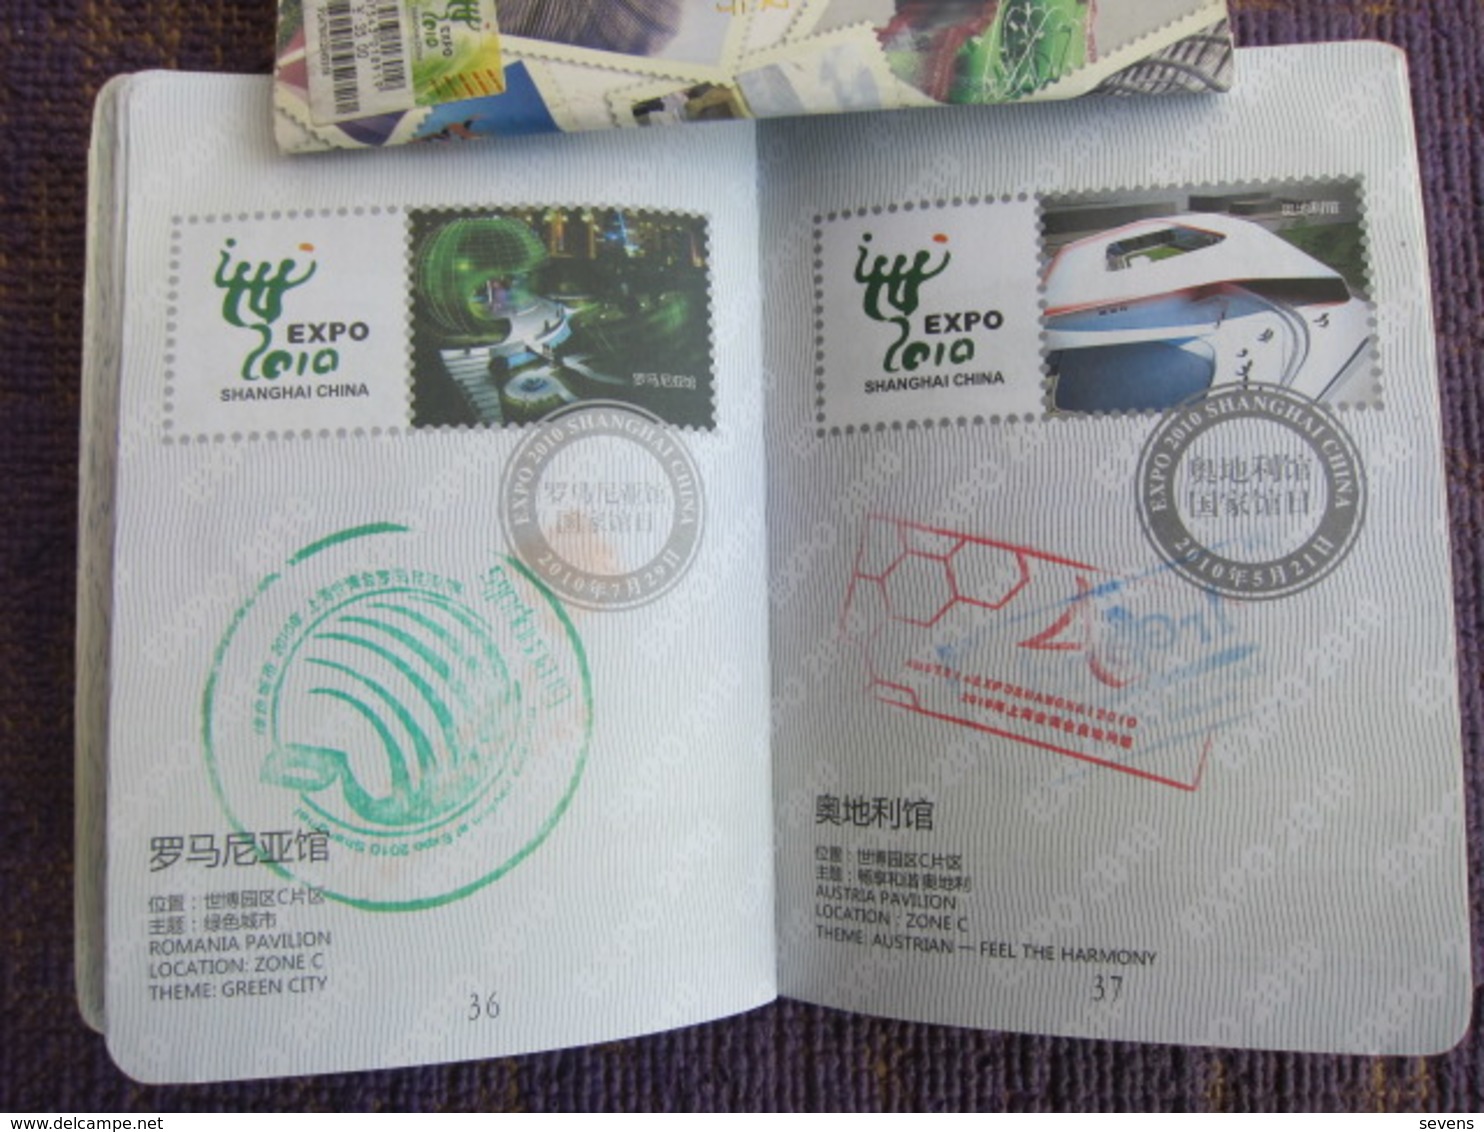 Shanghai 2010EXPO,passport with seals of 56 Pavilions,national and theme